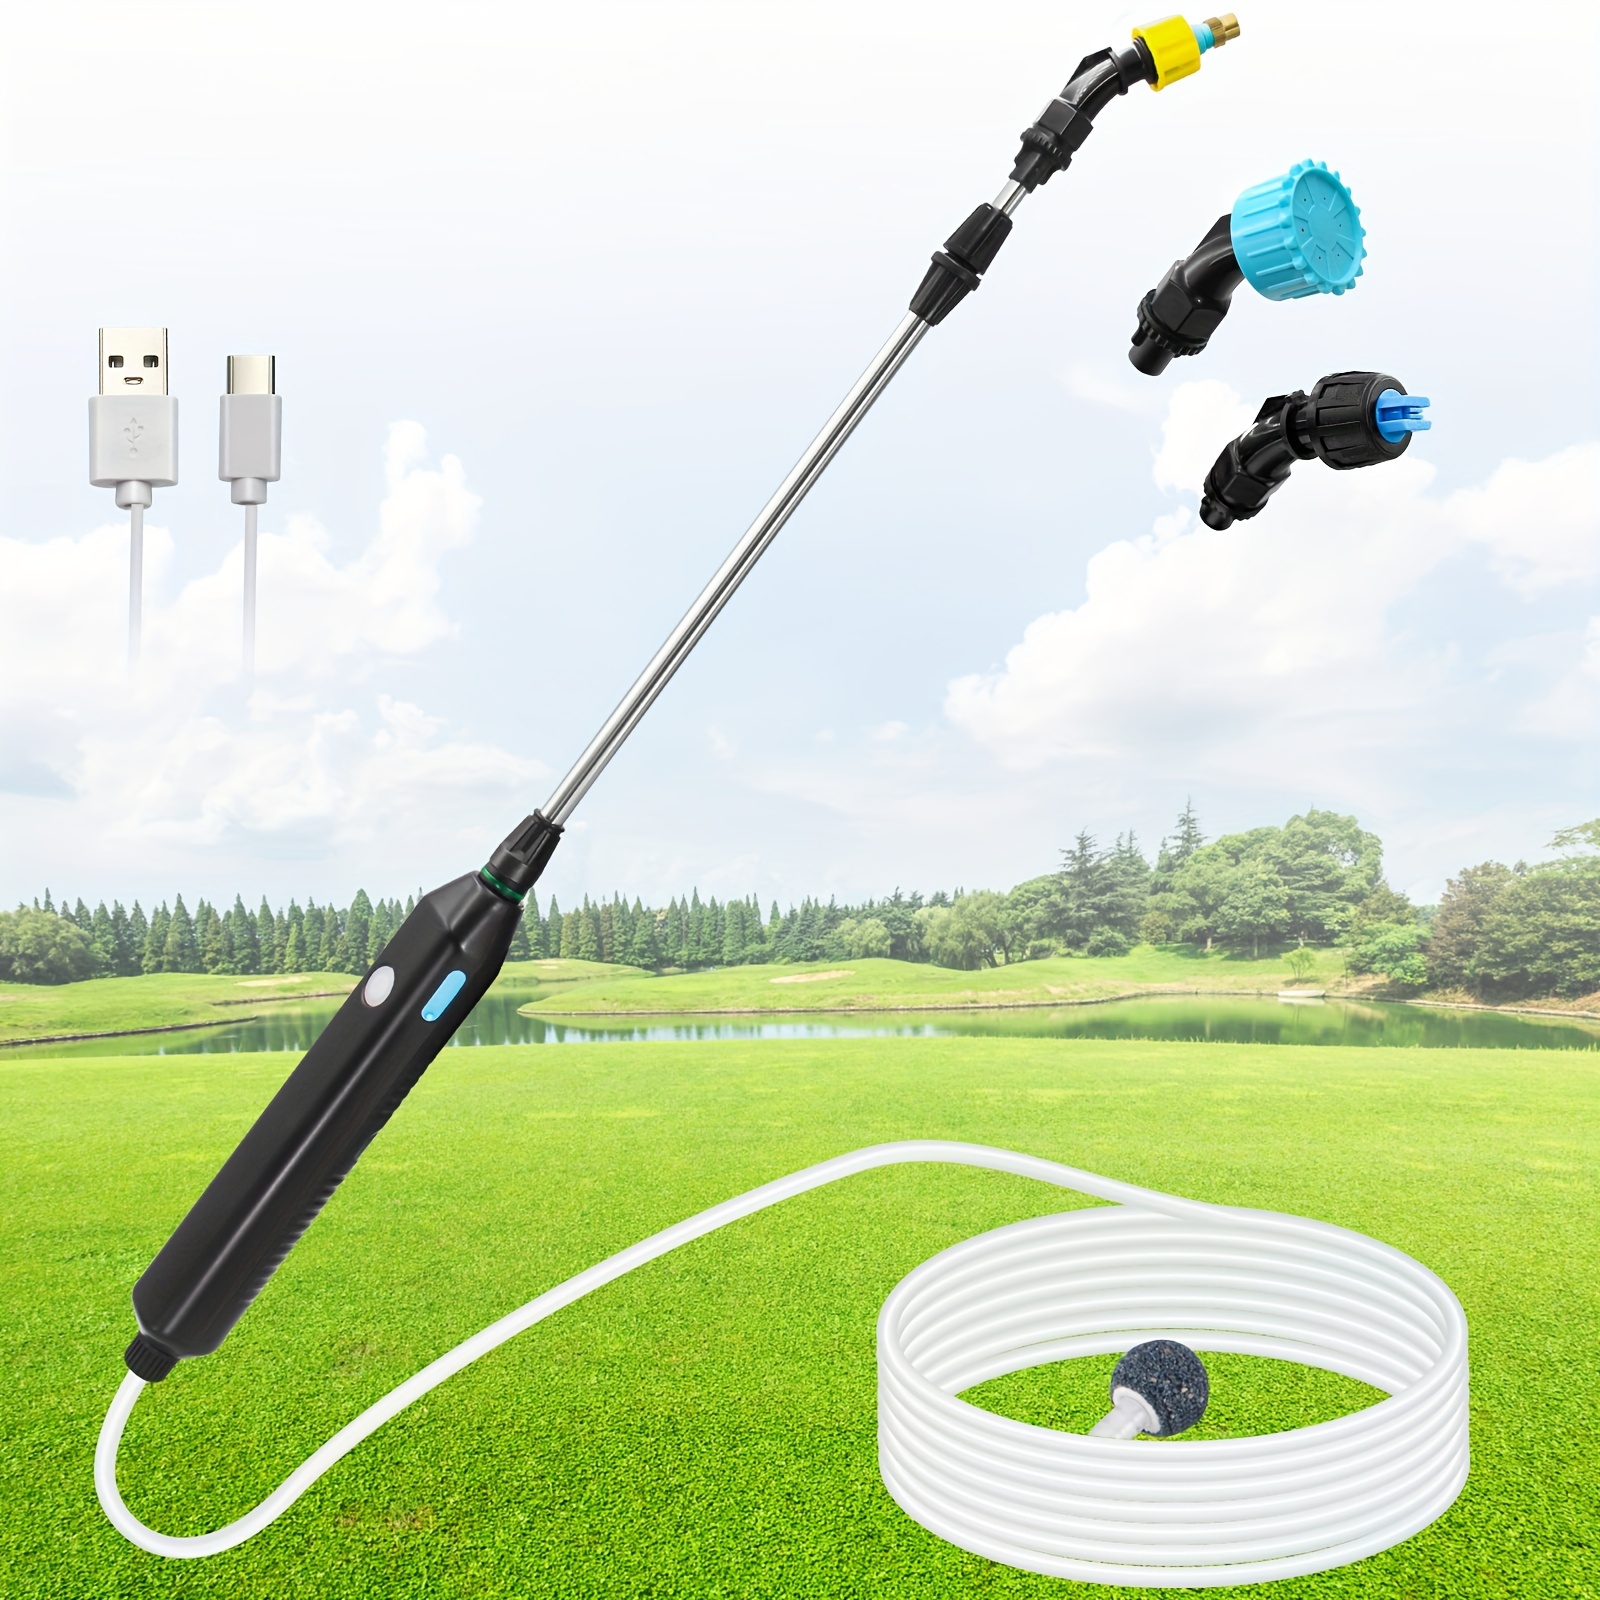 

Sideking Battery Powered Sprayer Wand, 23.6" Telescopic Wand With 10ft Hose For Garden Spraying (3 Nozzles)